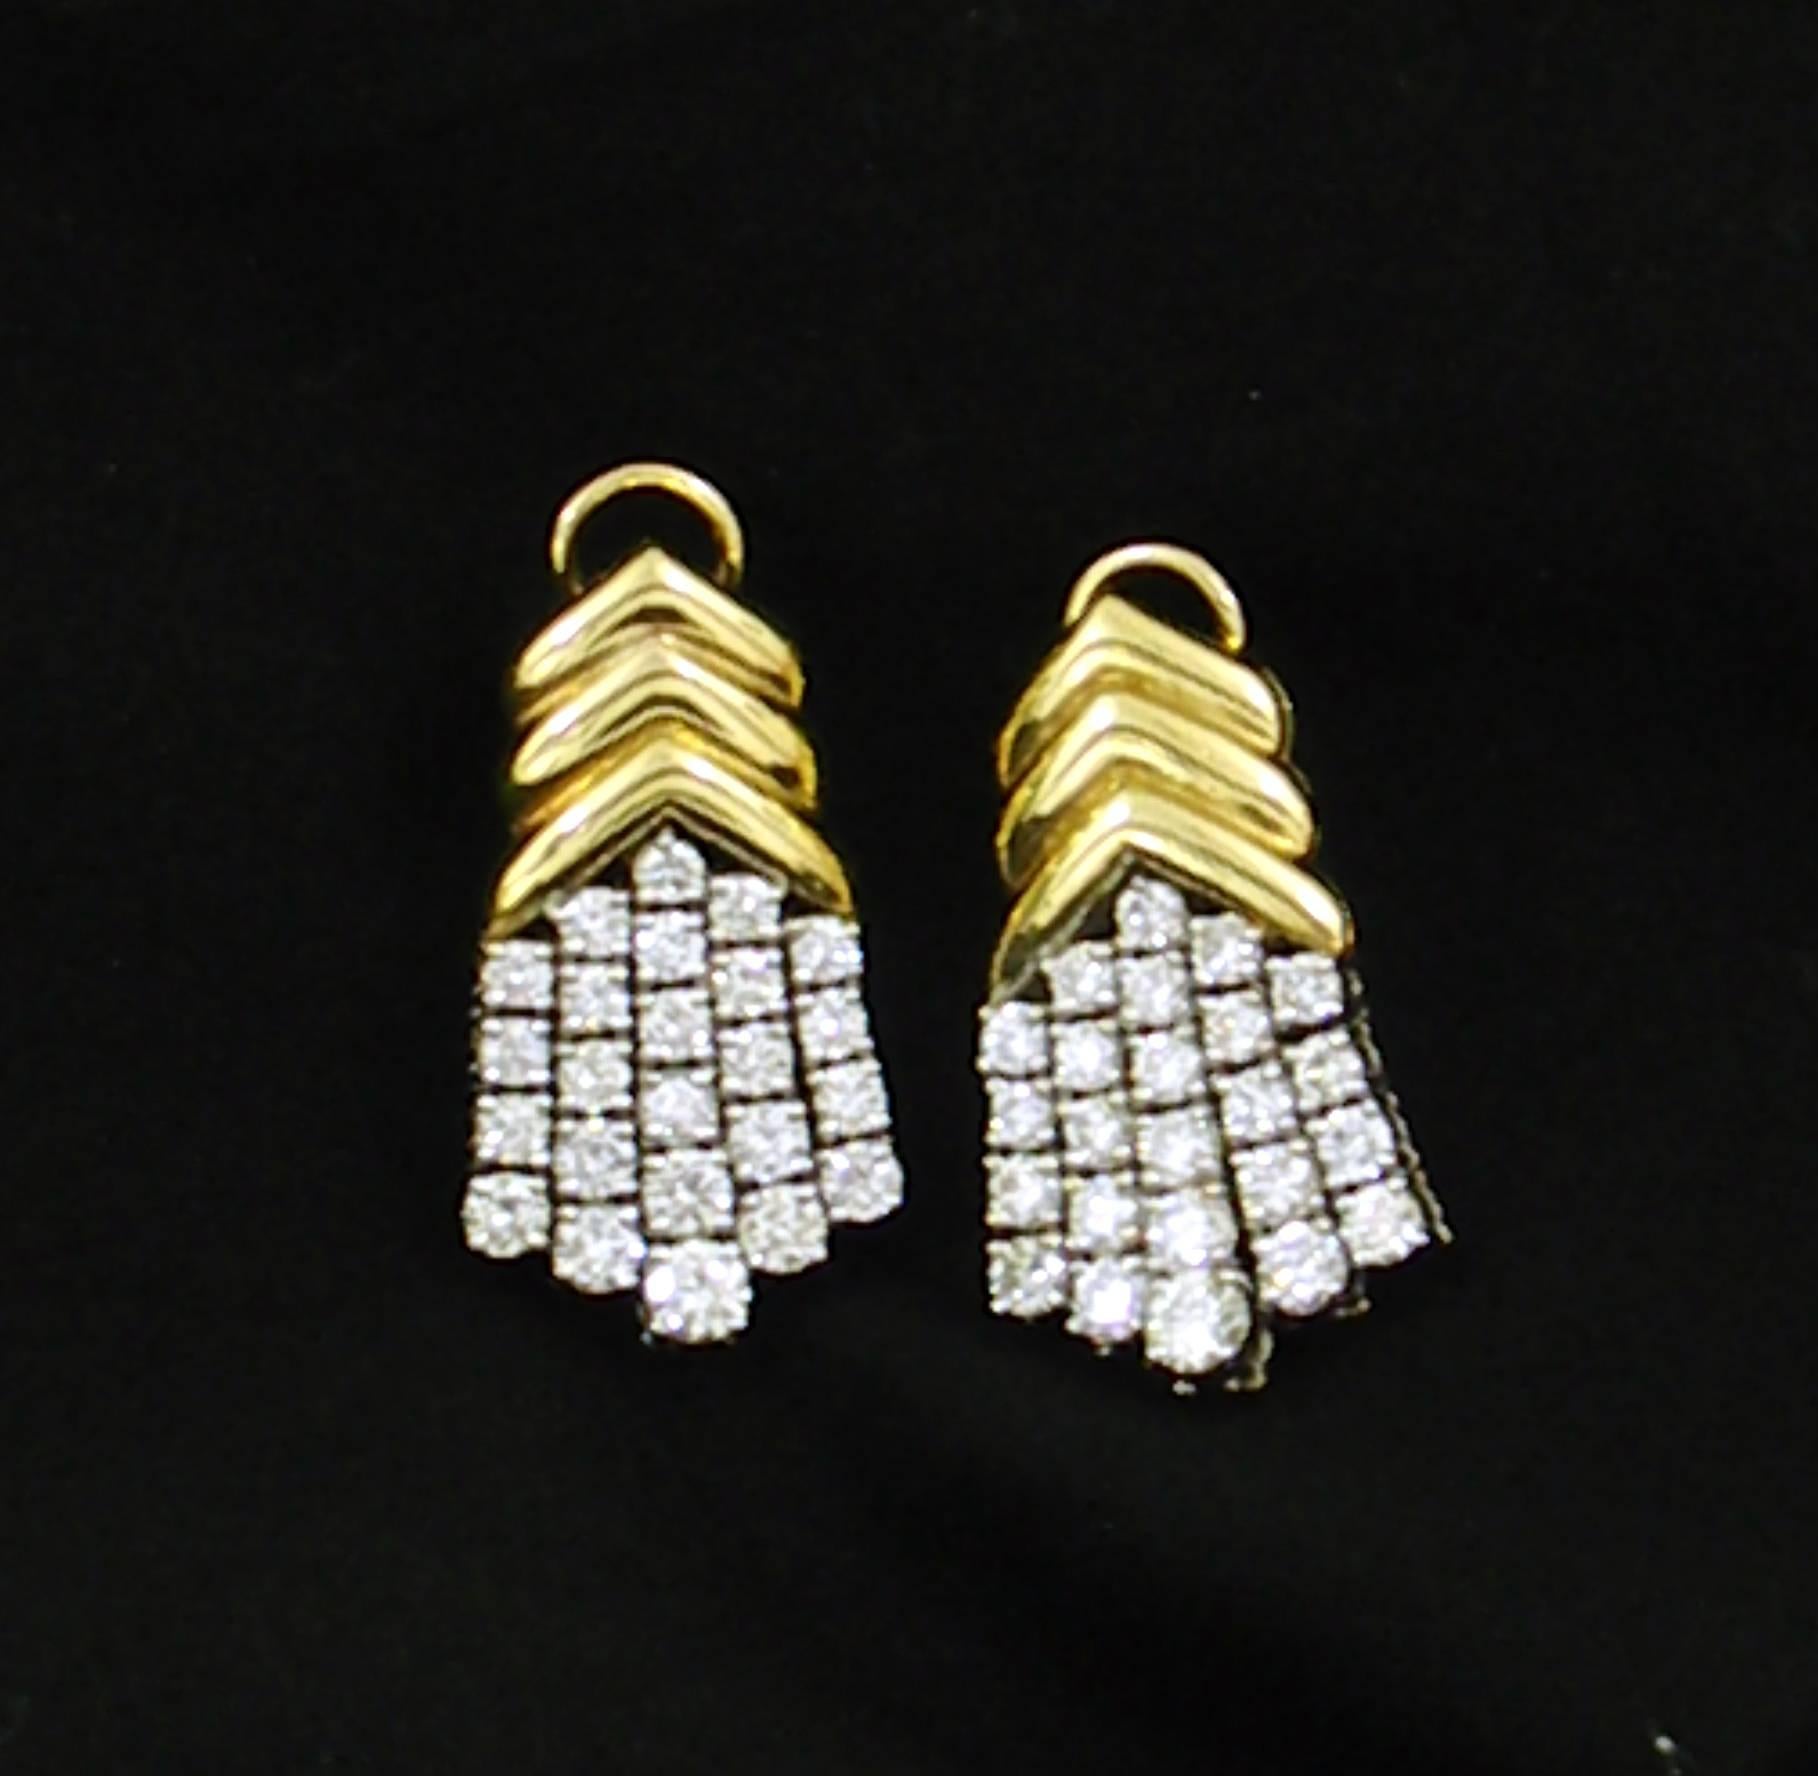 A pair of ladies 18K yellow and white gold earrings comprised of a yellow gold top comprised of three chevrons, and a bottom with five tassels of diamonds set in white gold. Each earring is set with 24 round brilliant cut diamonds for a total of 48